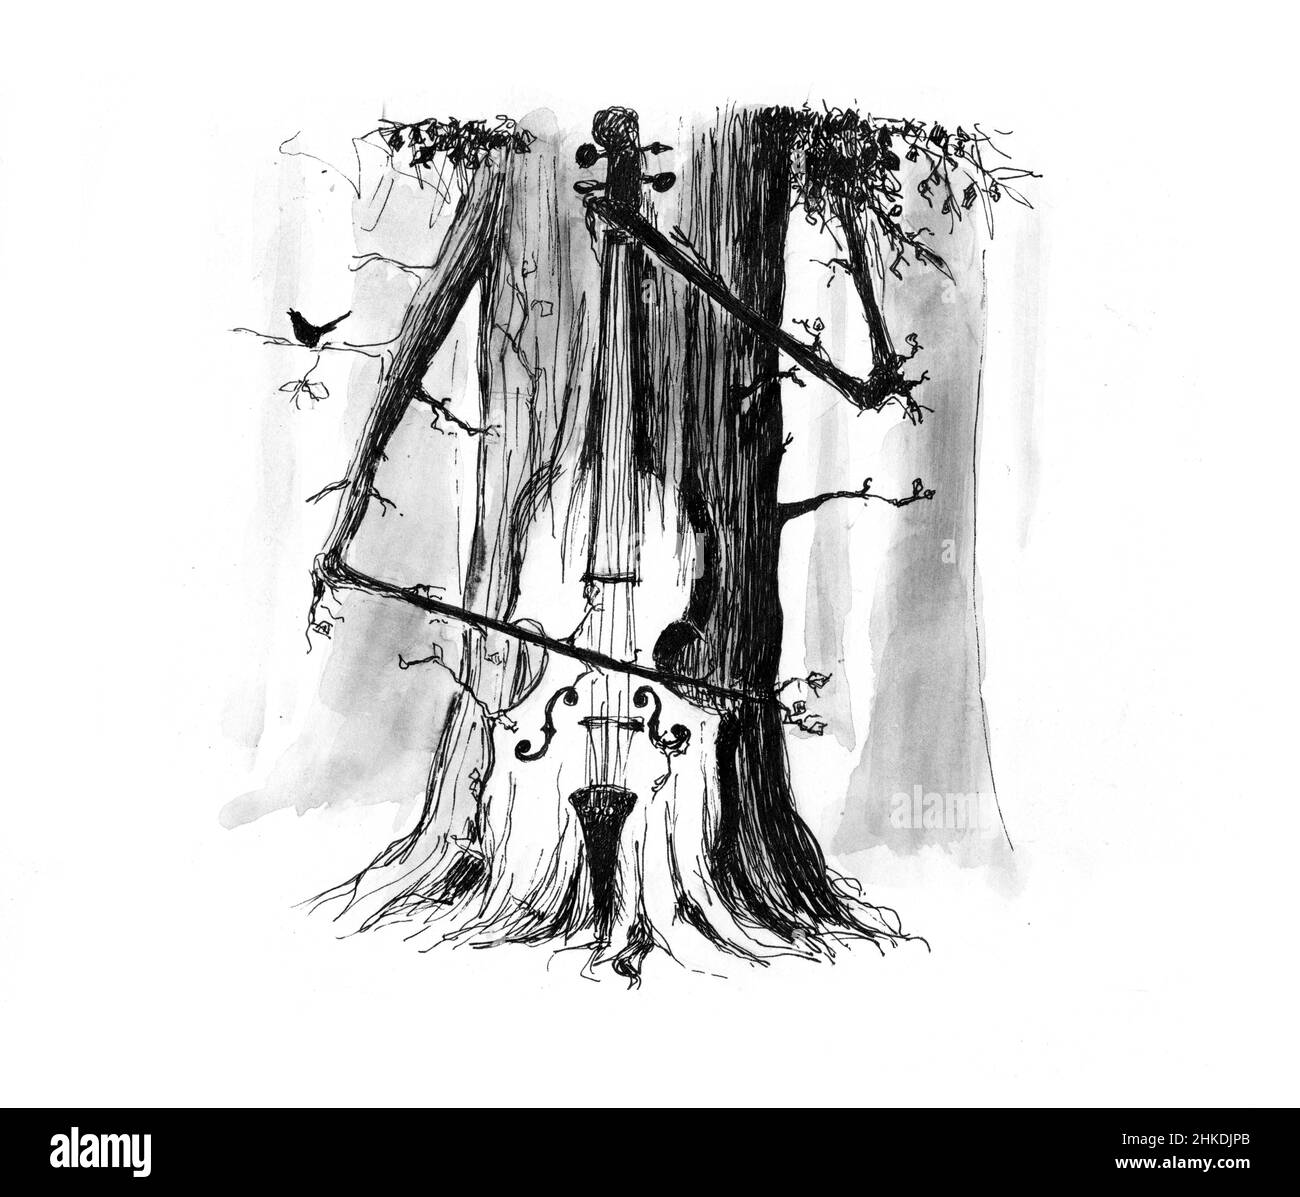 Nature music, nature sounds, relaxation music. This drawing illustrates it. A tree playing the double bass. Black and white pen drawing. Watercolor Stock Photo